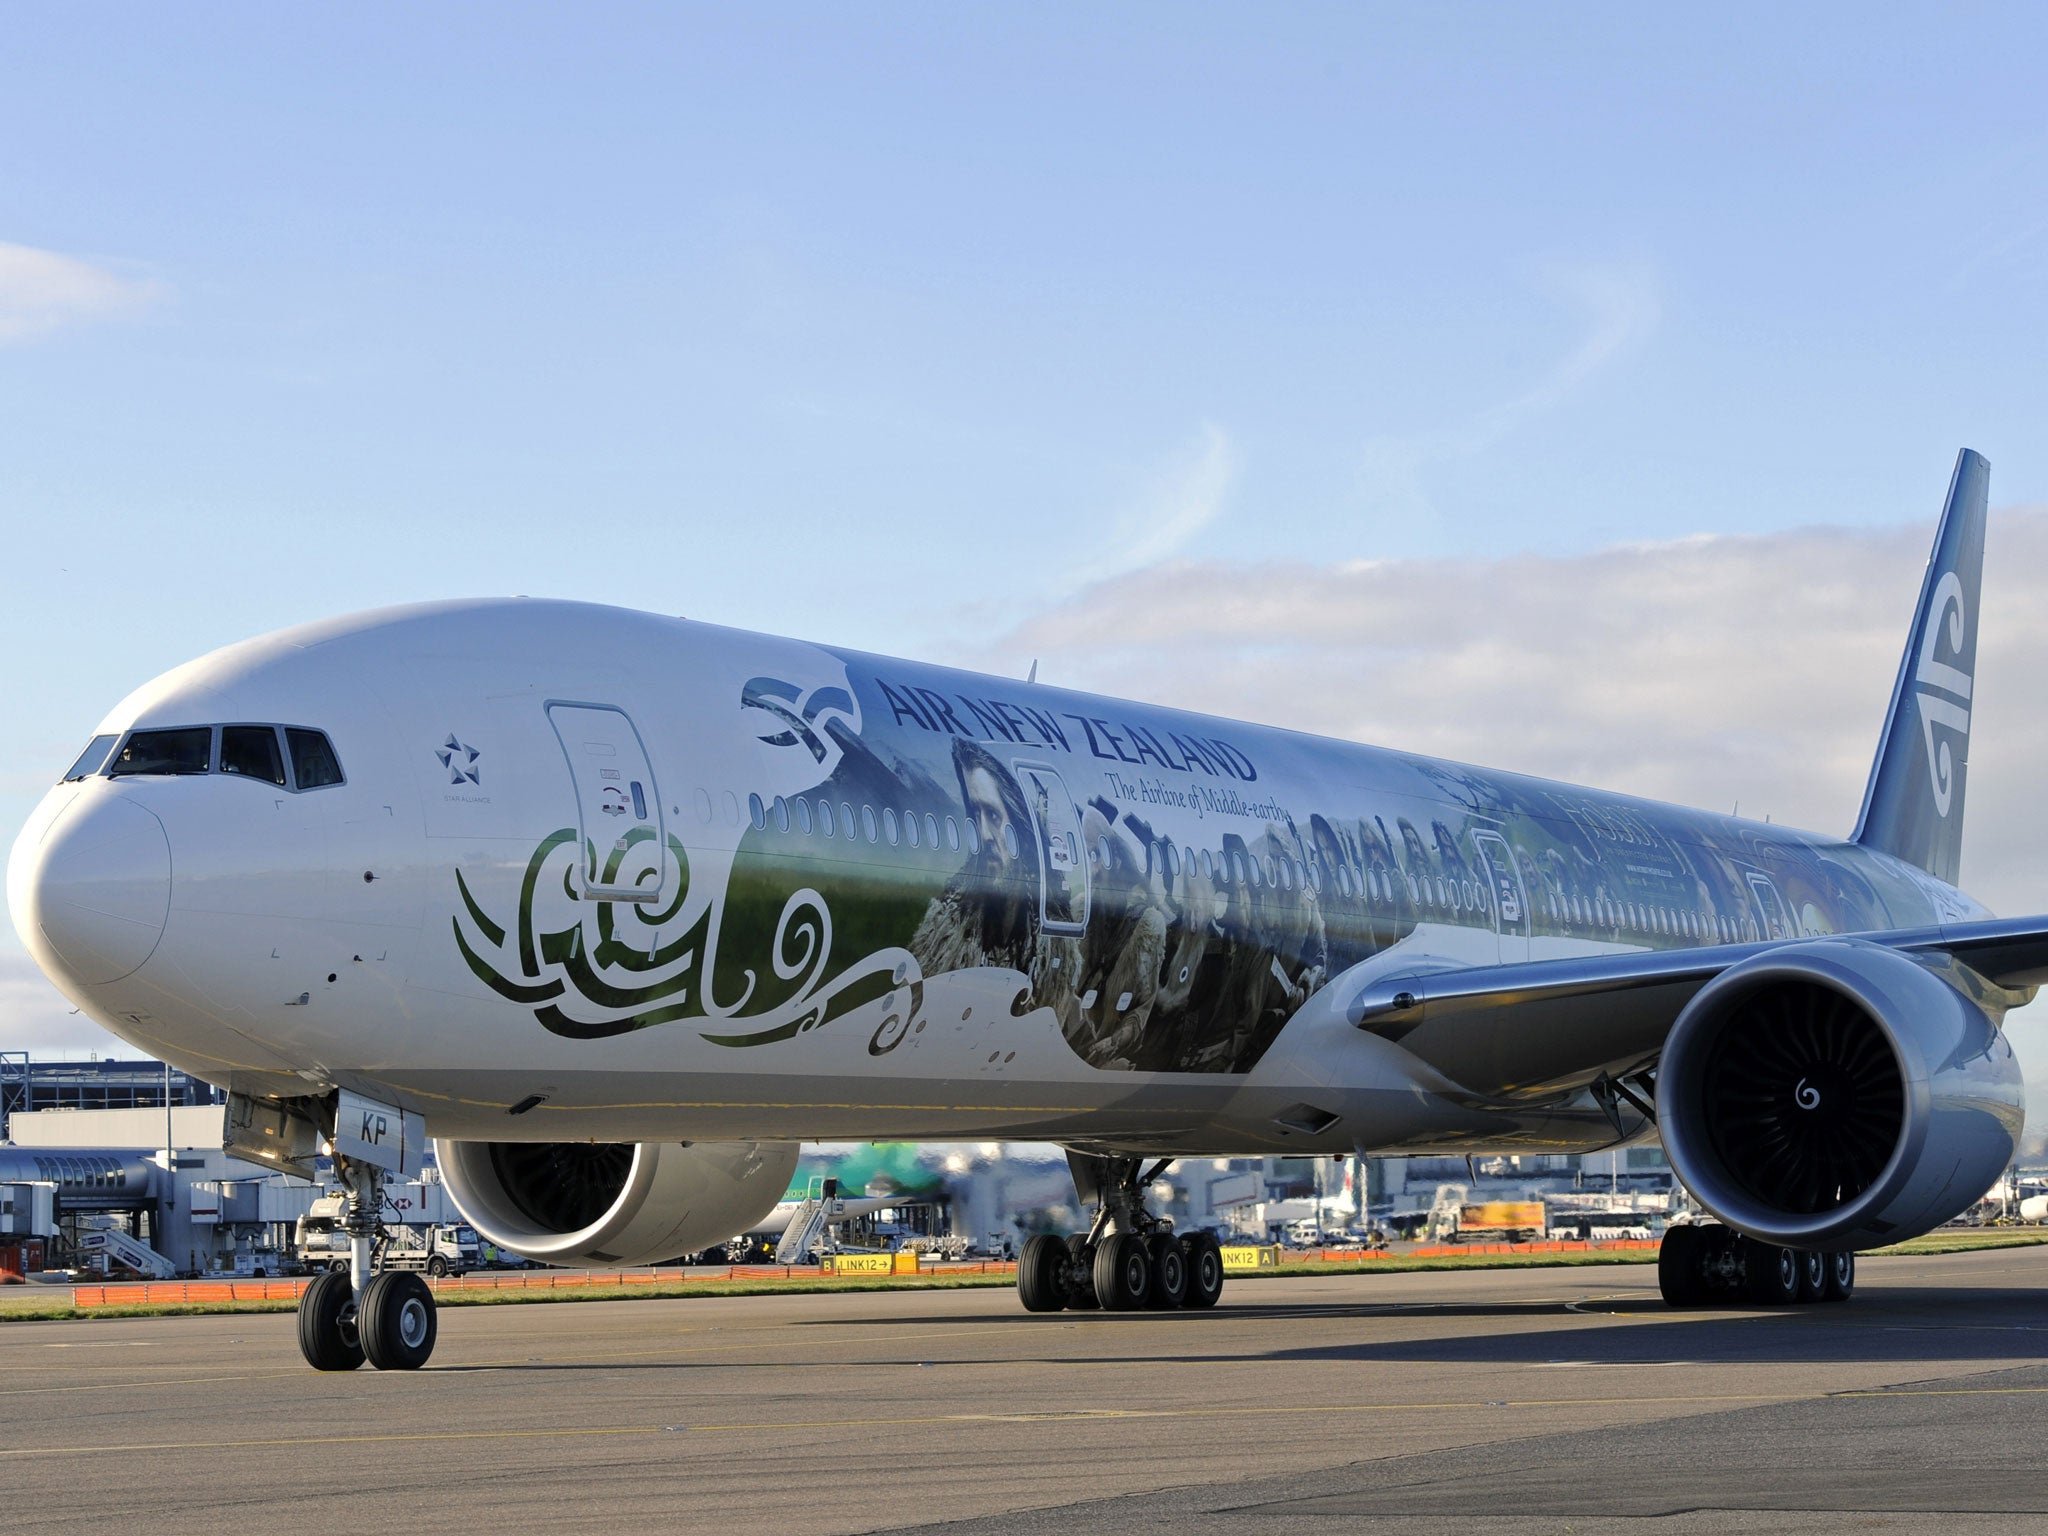 Air New Zealand carried stars of 'The Hobbit' to the New Zealand premiere in a special Lord of the Rings branded plane.